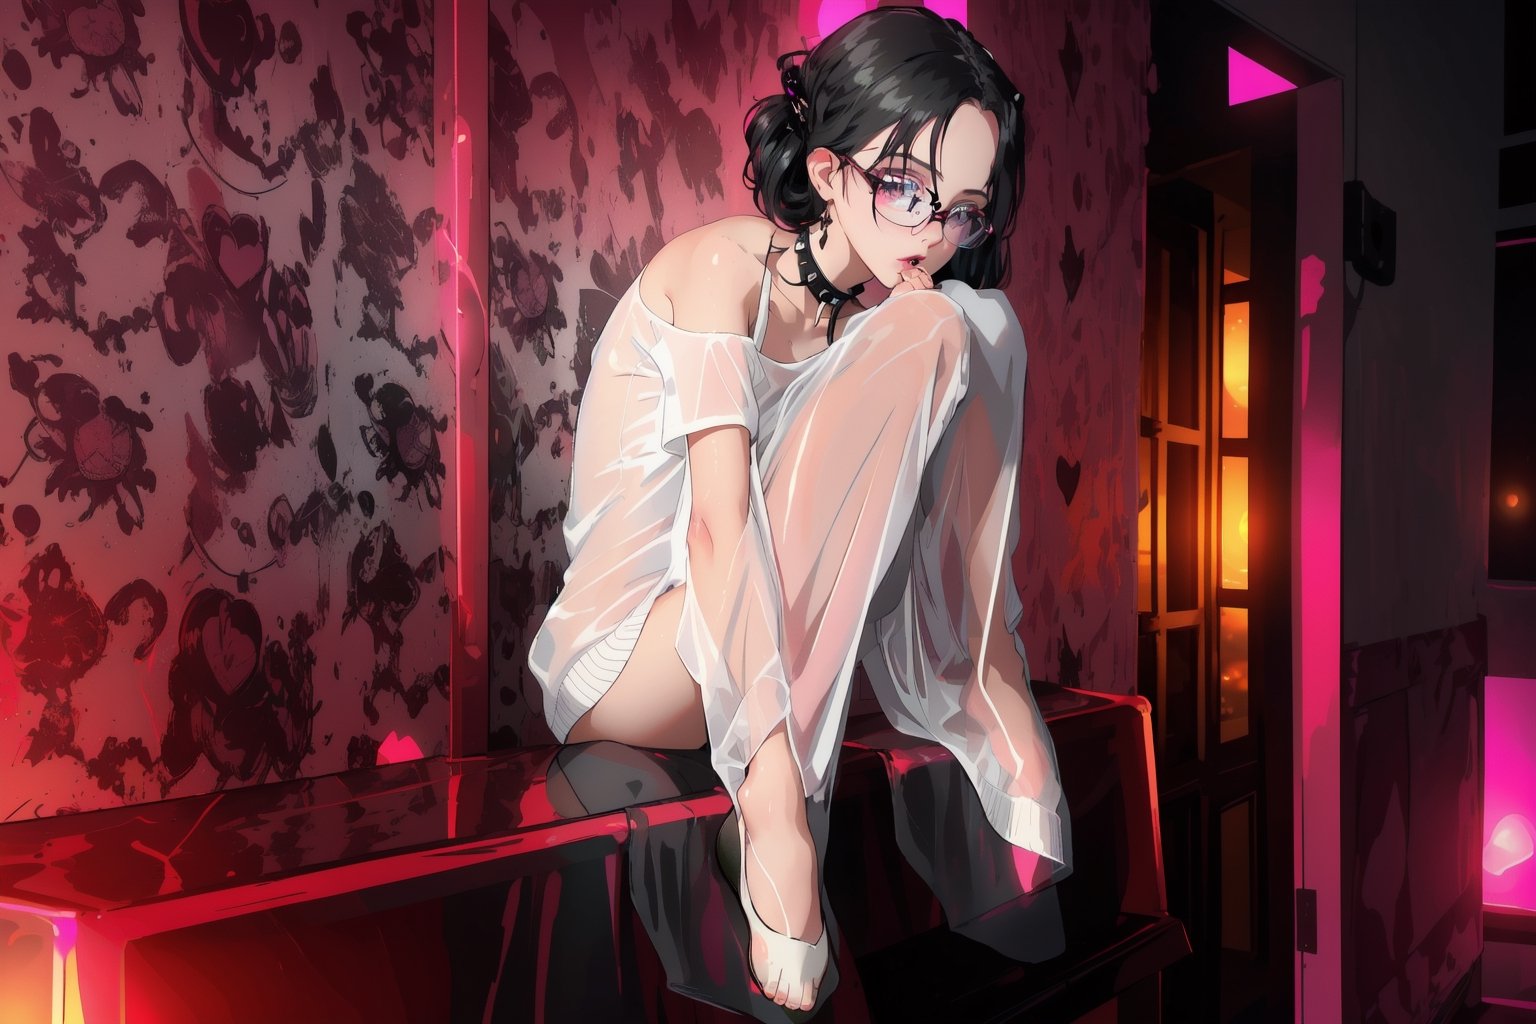 a young 18-year-old dwarf girl erotically posing for a photographer in a vulgar nightclub, the girl is wearing only a translucent white knee-length shirt, the girl has no clothes and underwear under the T-shirt, a small one is visible under the T-shirt breasts and a beautiful vagina, a bdsm collar with spikes, large round nerd glasses, black gotick straight shoulder-length hair, eyes lined with black mascara, gothic style eyes, black mascara
in the background there are many naked people dancing at a rave party, the nightclub is dark, neon lighting, bokeh, dim lighting, The room decoration on the walls in the background uses pink neon love hearts, sex club, swingers club, cinematic lighting, volumetric lighting, sexual pose, atmosphere of lust and sex,,IncrsPajChal,see-through, overall plan, whole body from head to toe,naked sweater, sweater,AIDA_LoRA_sonm